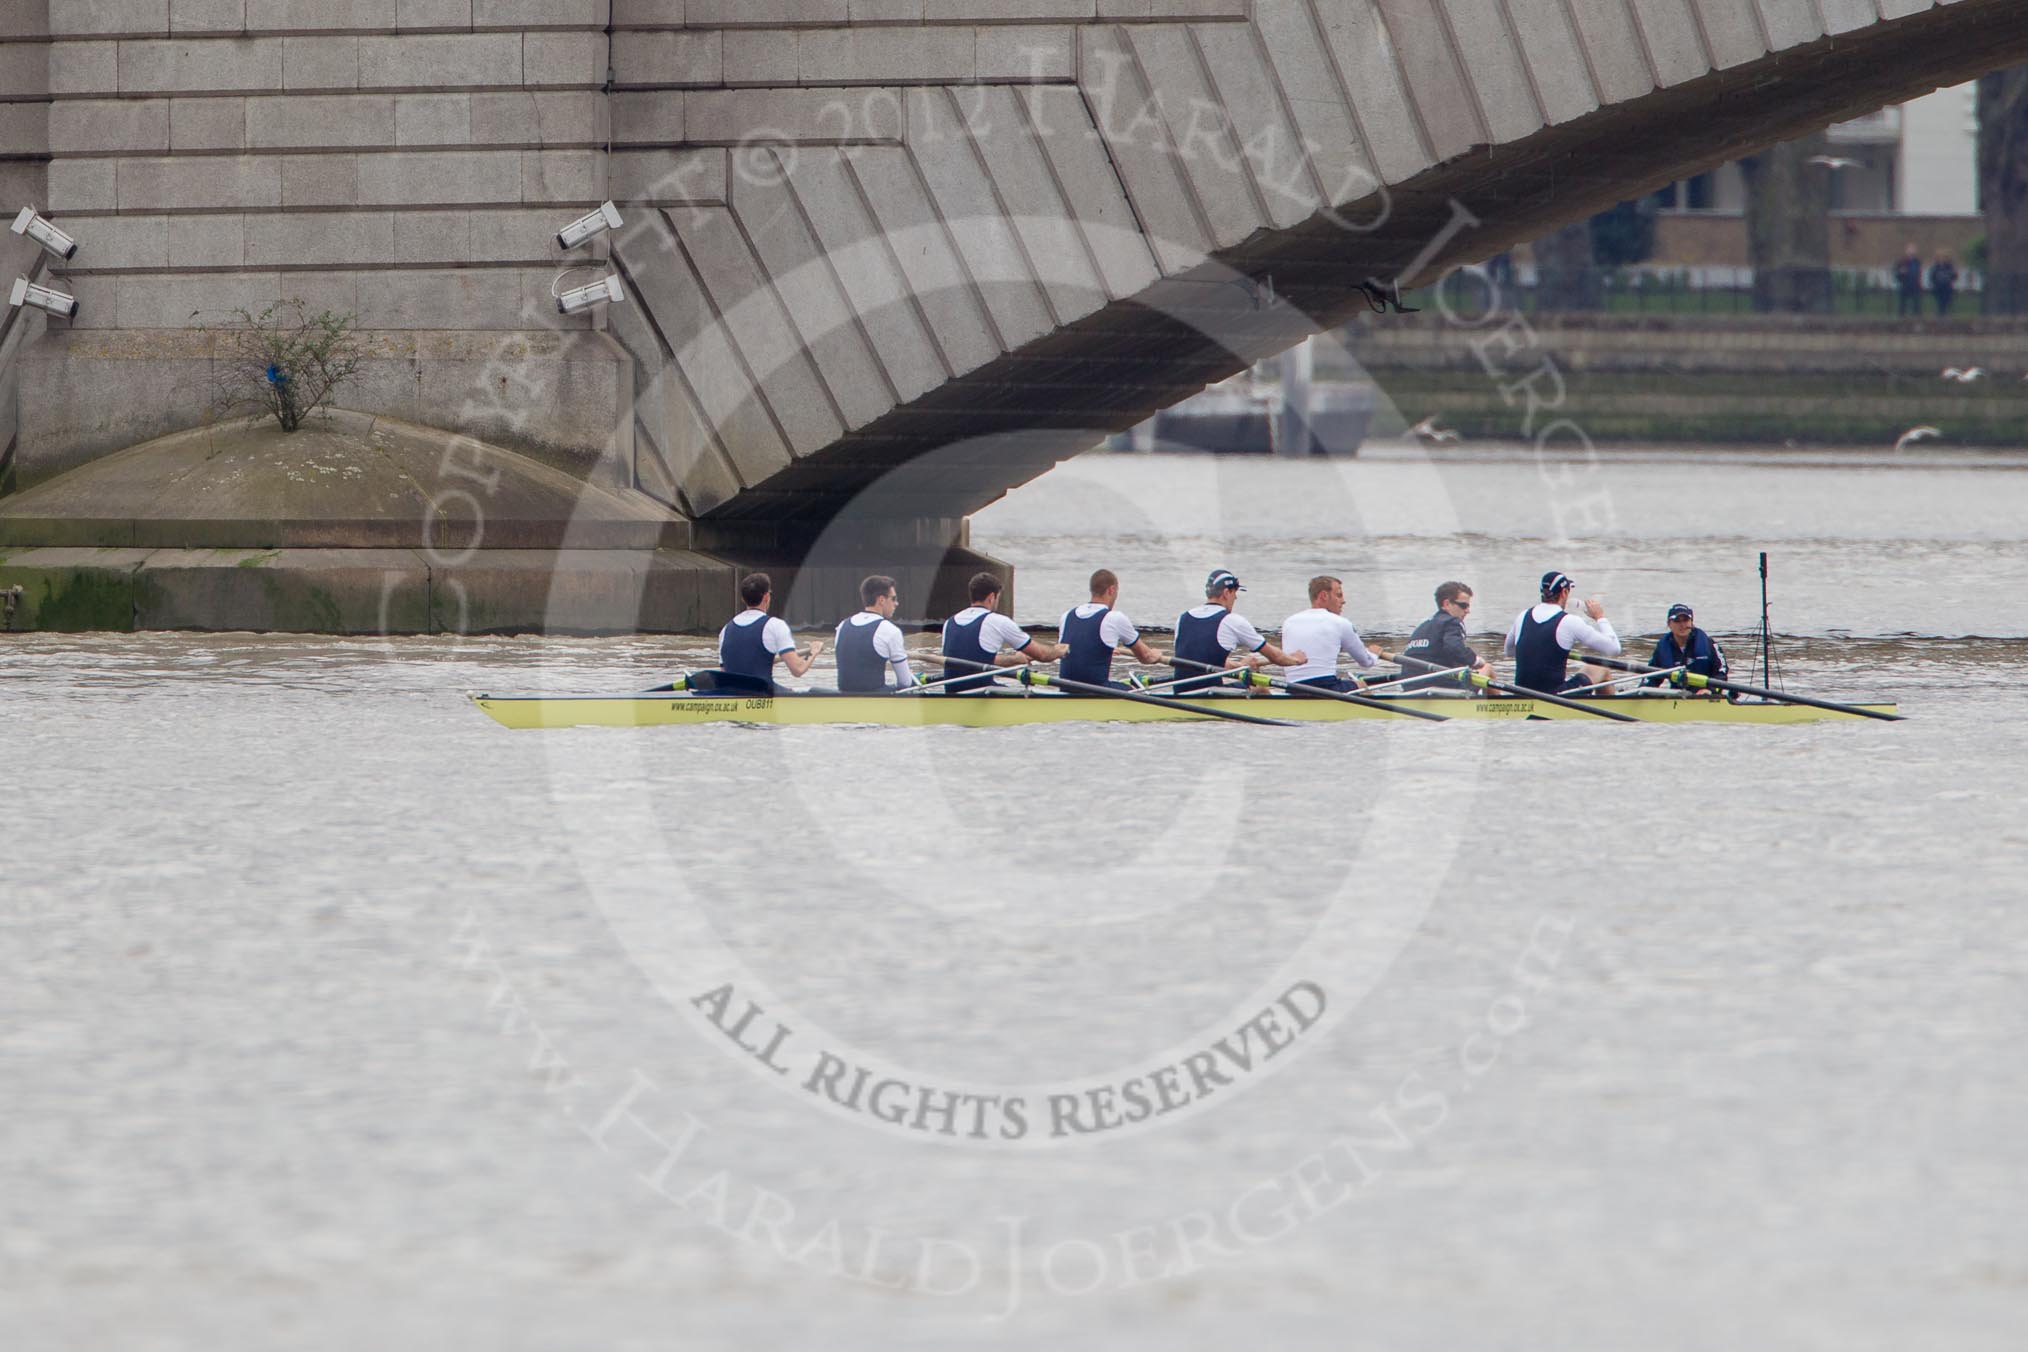 The Boat Race 2012: The Oxford Blue Boat minutes before the start of the 2012 Boat Race, moving below Putney Bridge to the stake boat where they will start the race..




on 07 April 2012 at 14:08, image #207